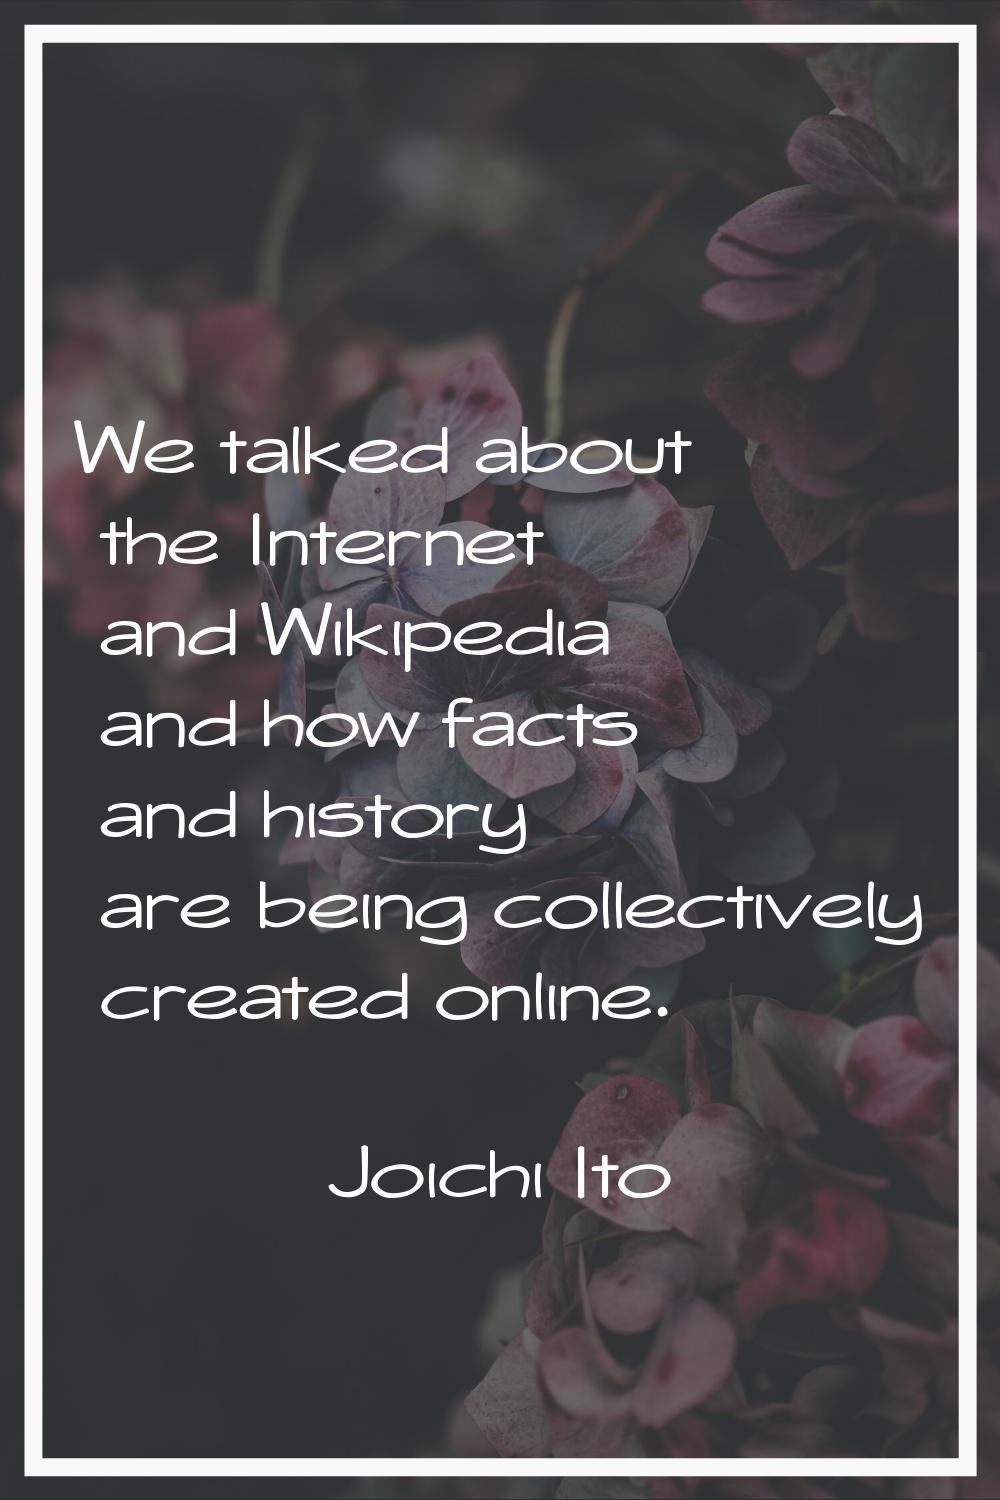 We talked about the Internet and Wikipedia and how facts and history are being collectively created